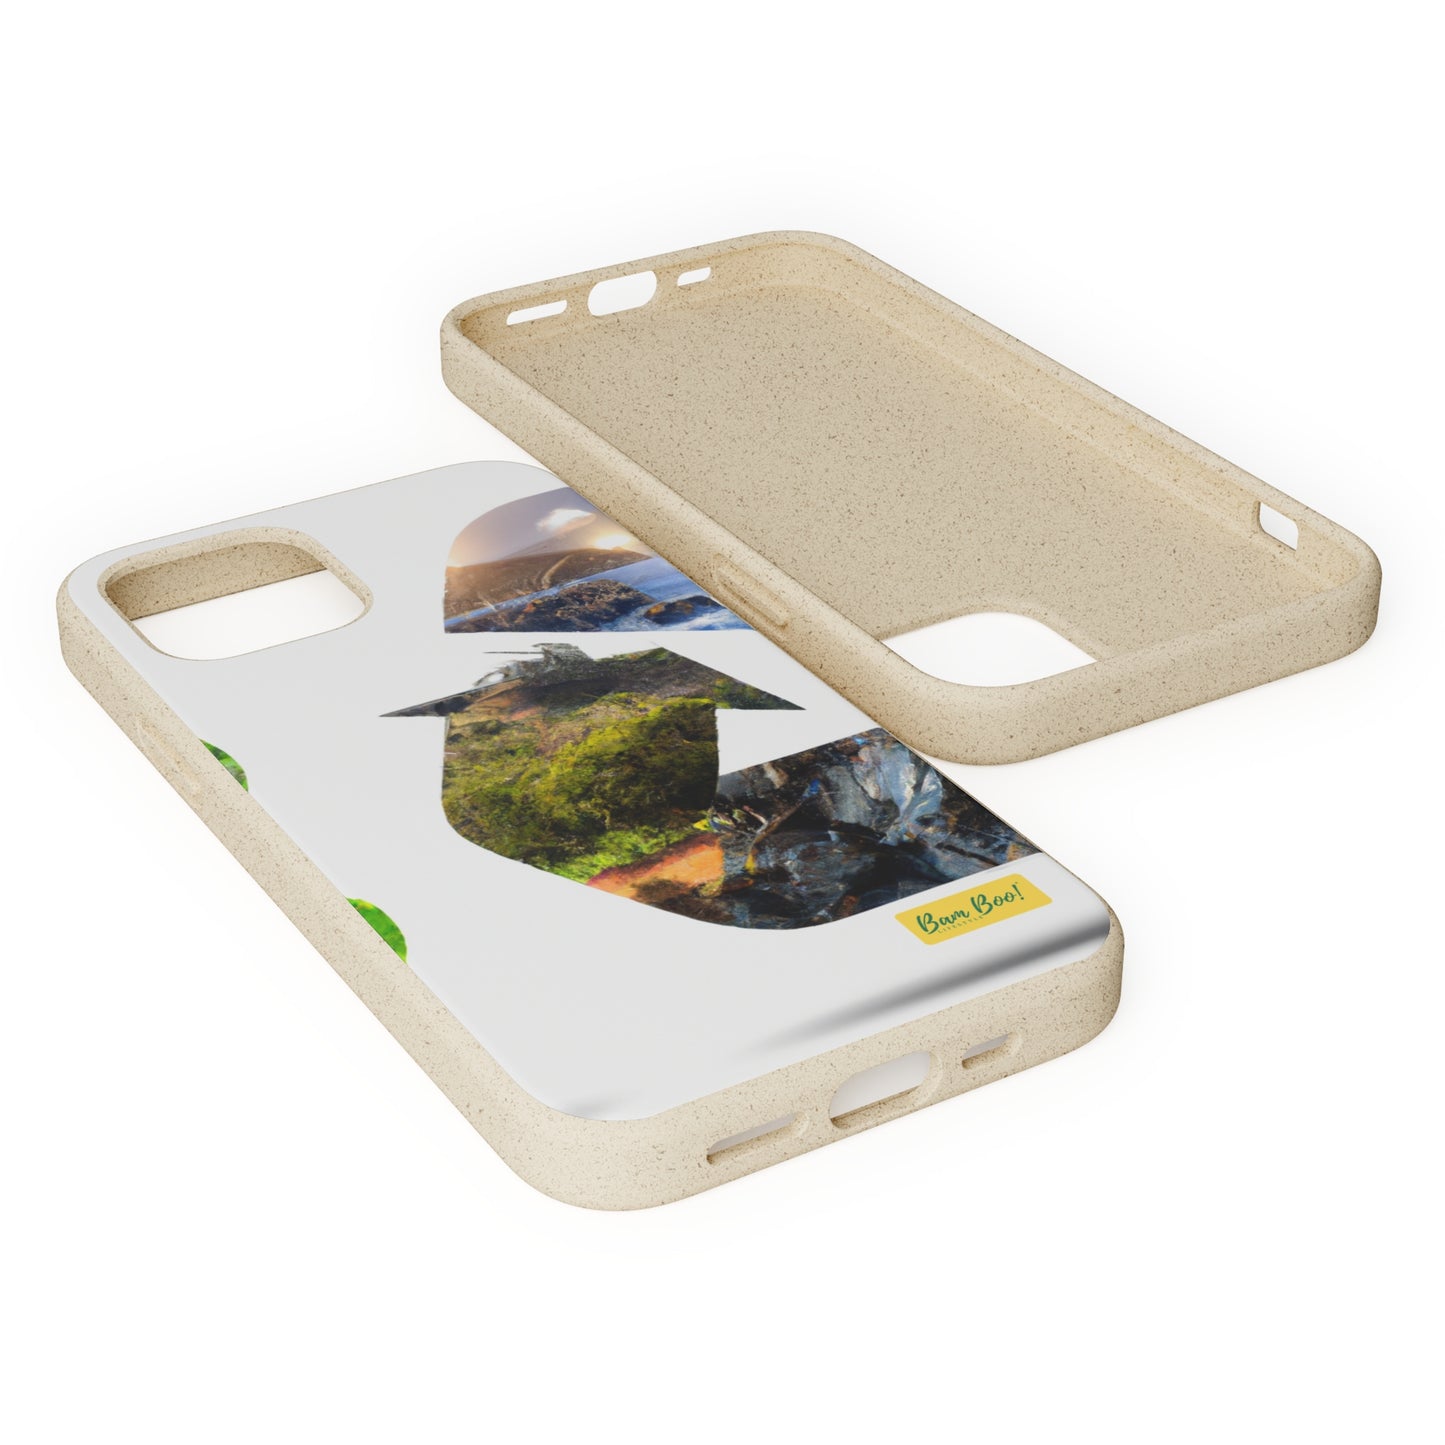 "Artificial Nature: Exploring the Intersection of Organic and Synthetic Life" - Bam Boo! Lifestyle Eco-friendly Cases